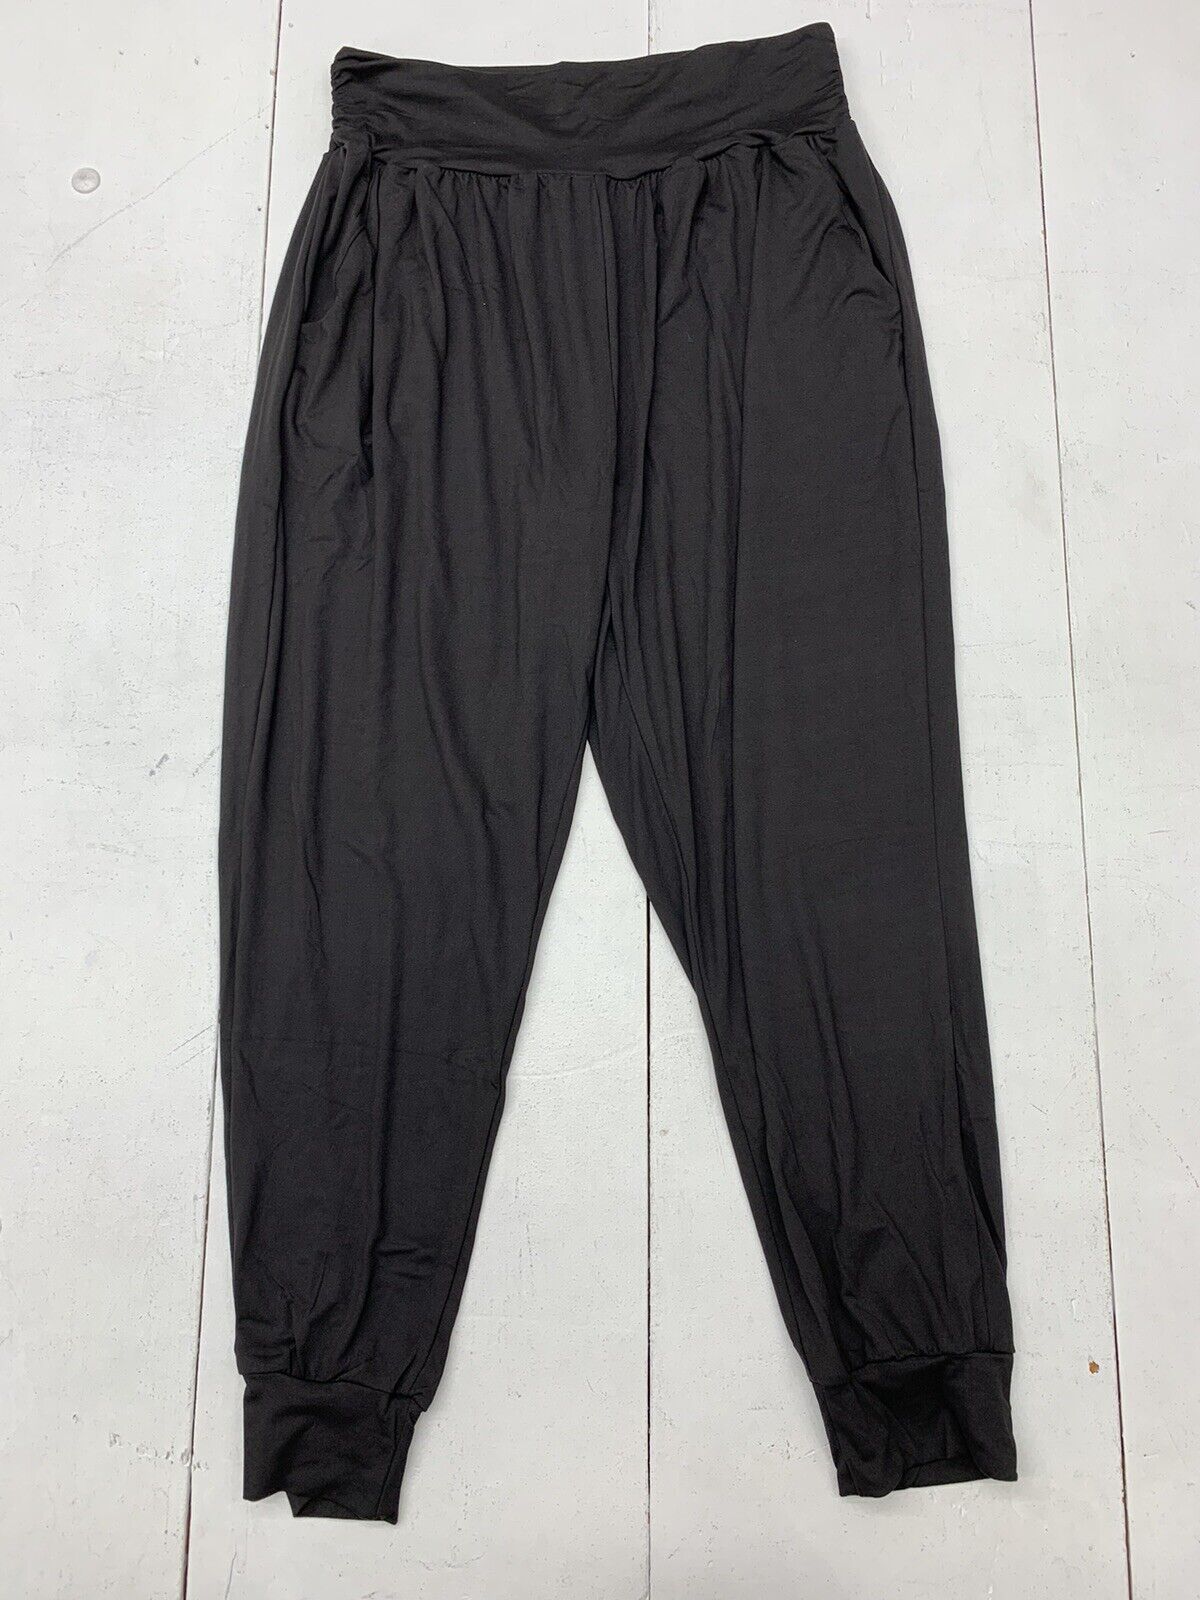 Unbranded Womens Black Athletic Pants Size XXL